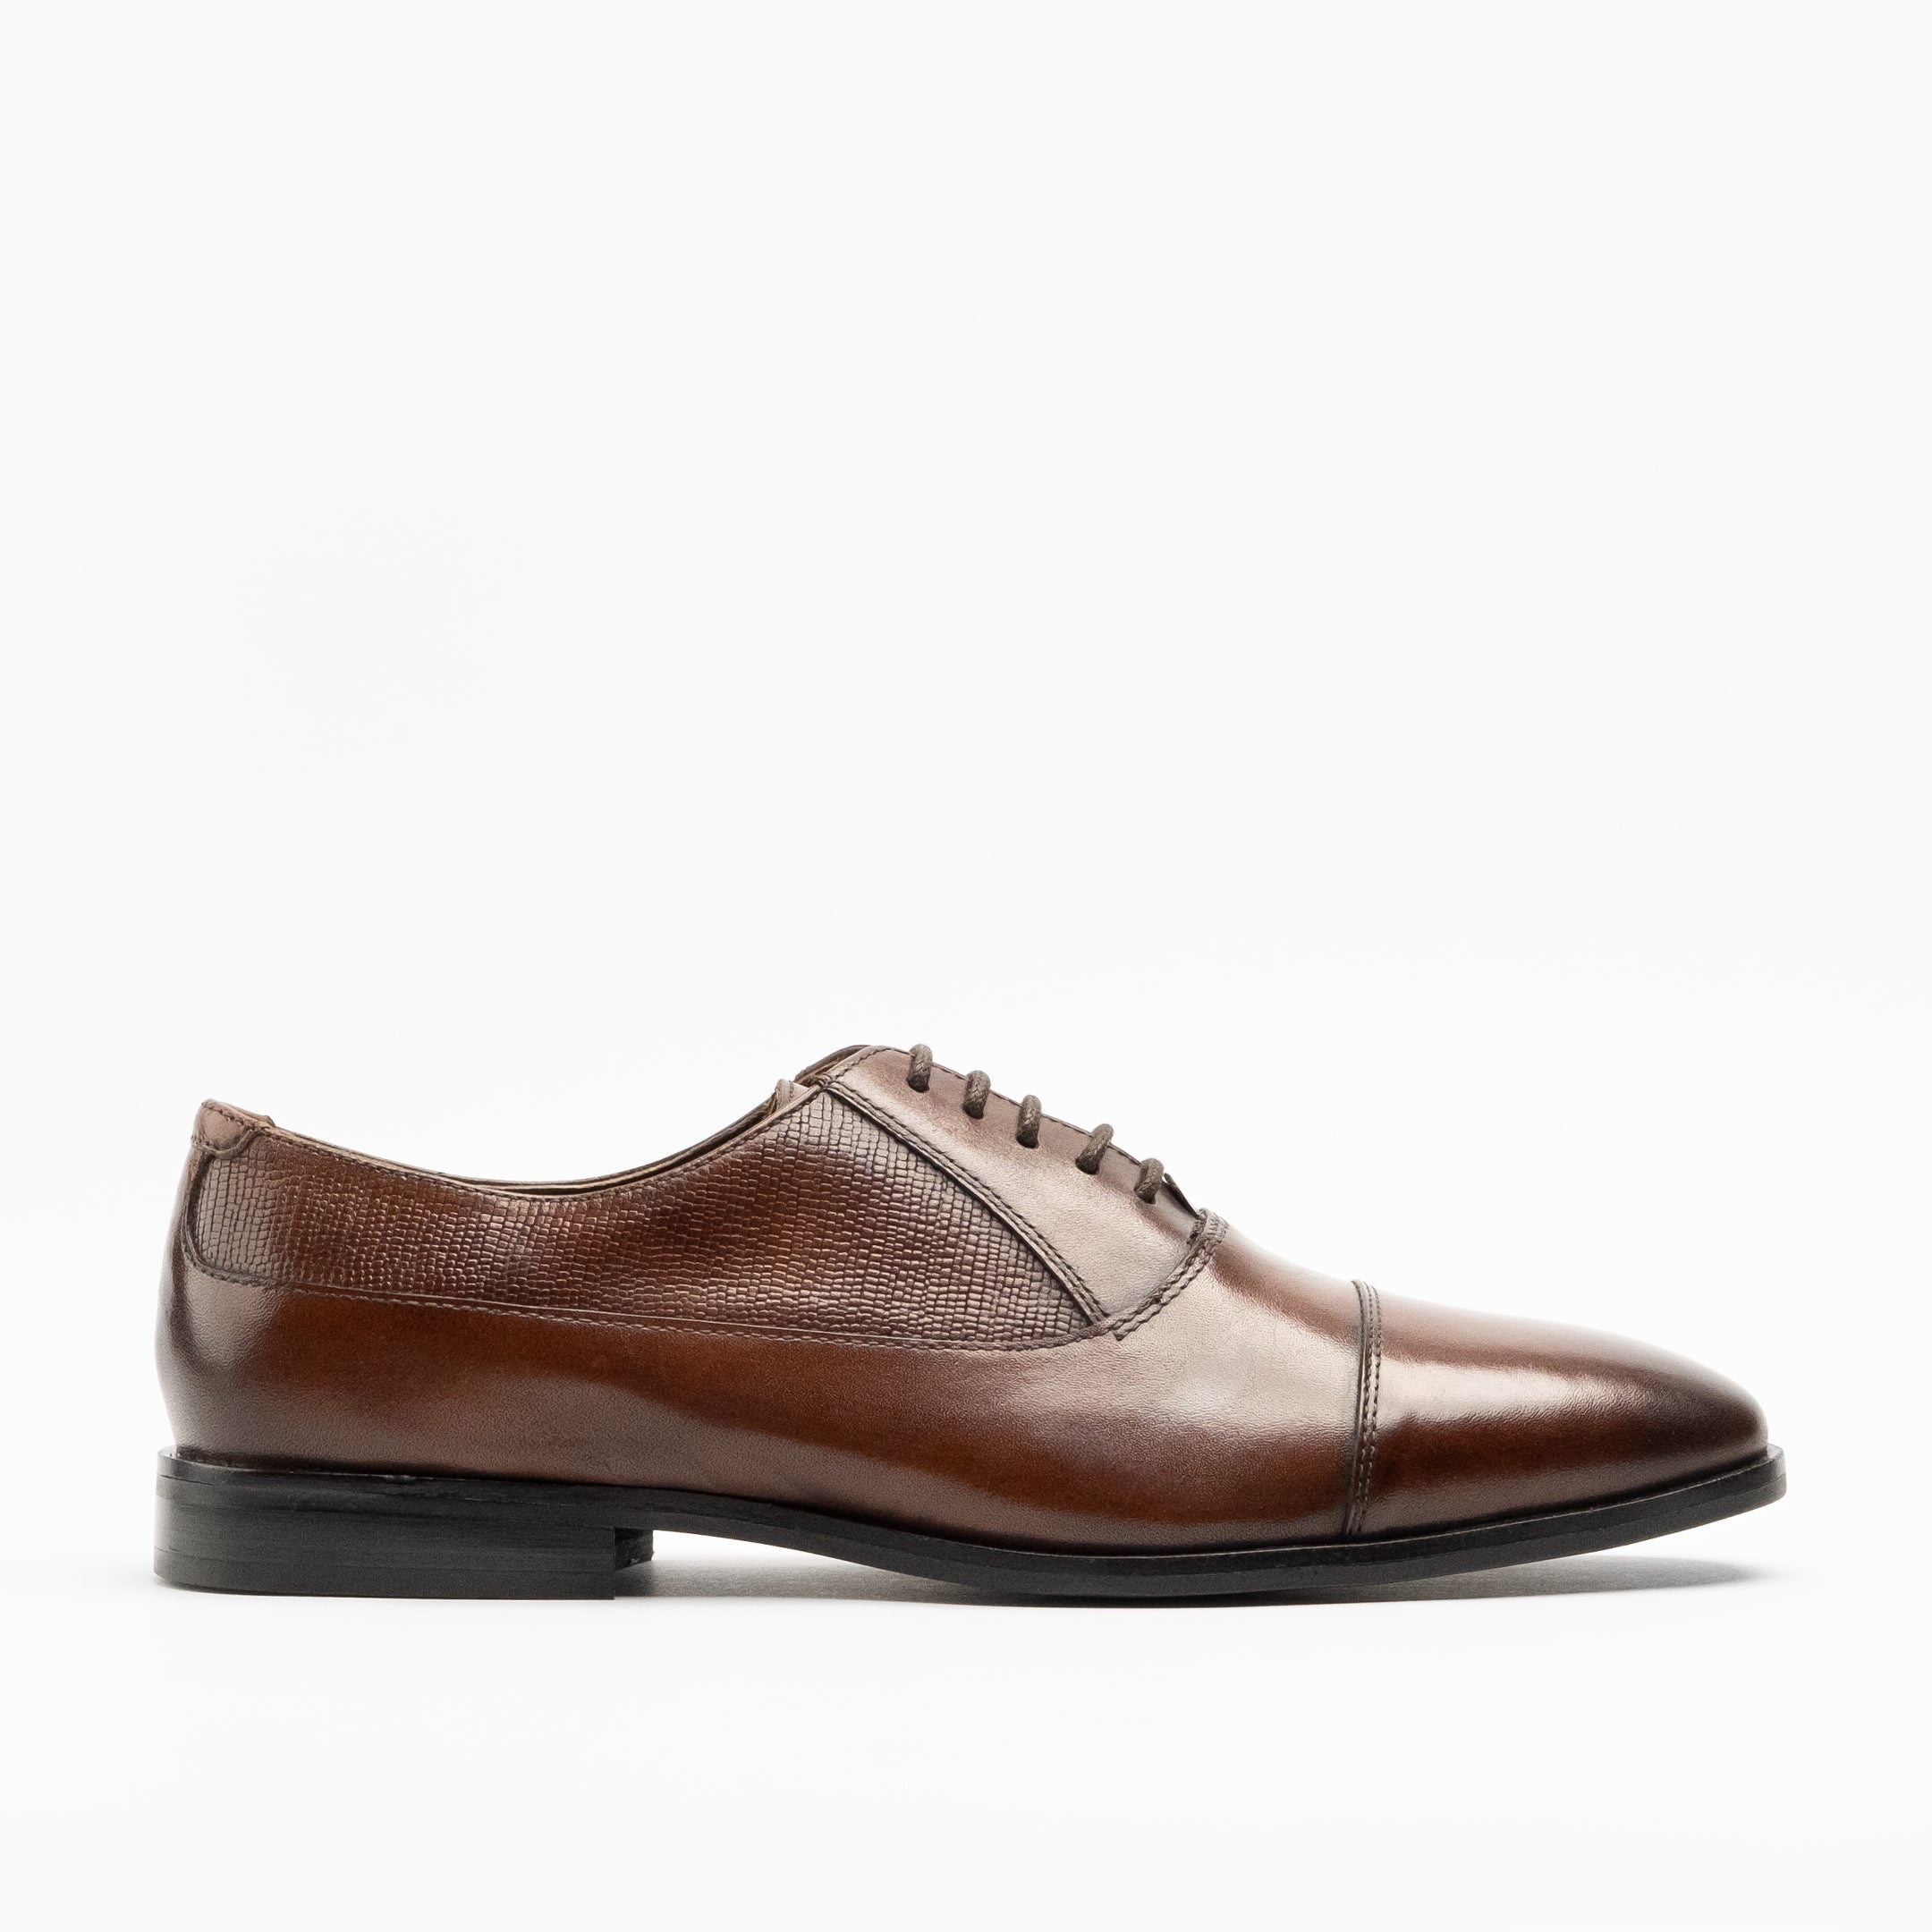 Walk London Mens Florence Oxford Toe Cap in Brown Leather